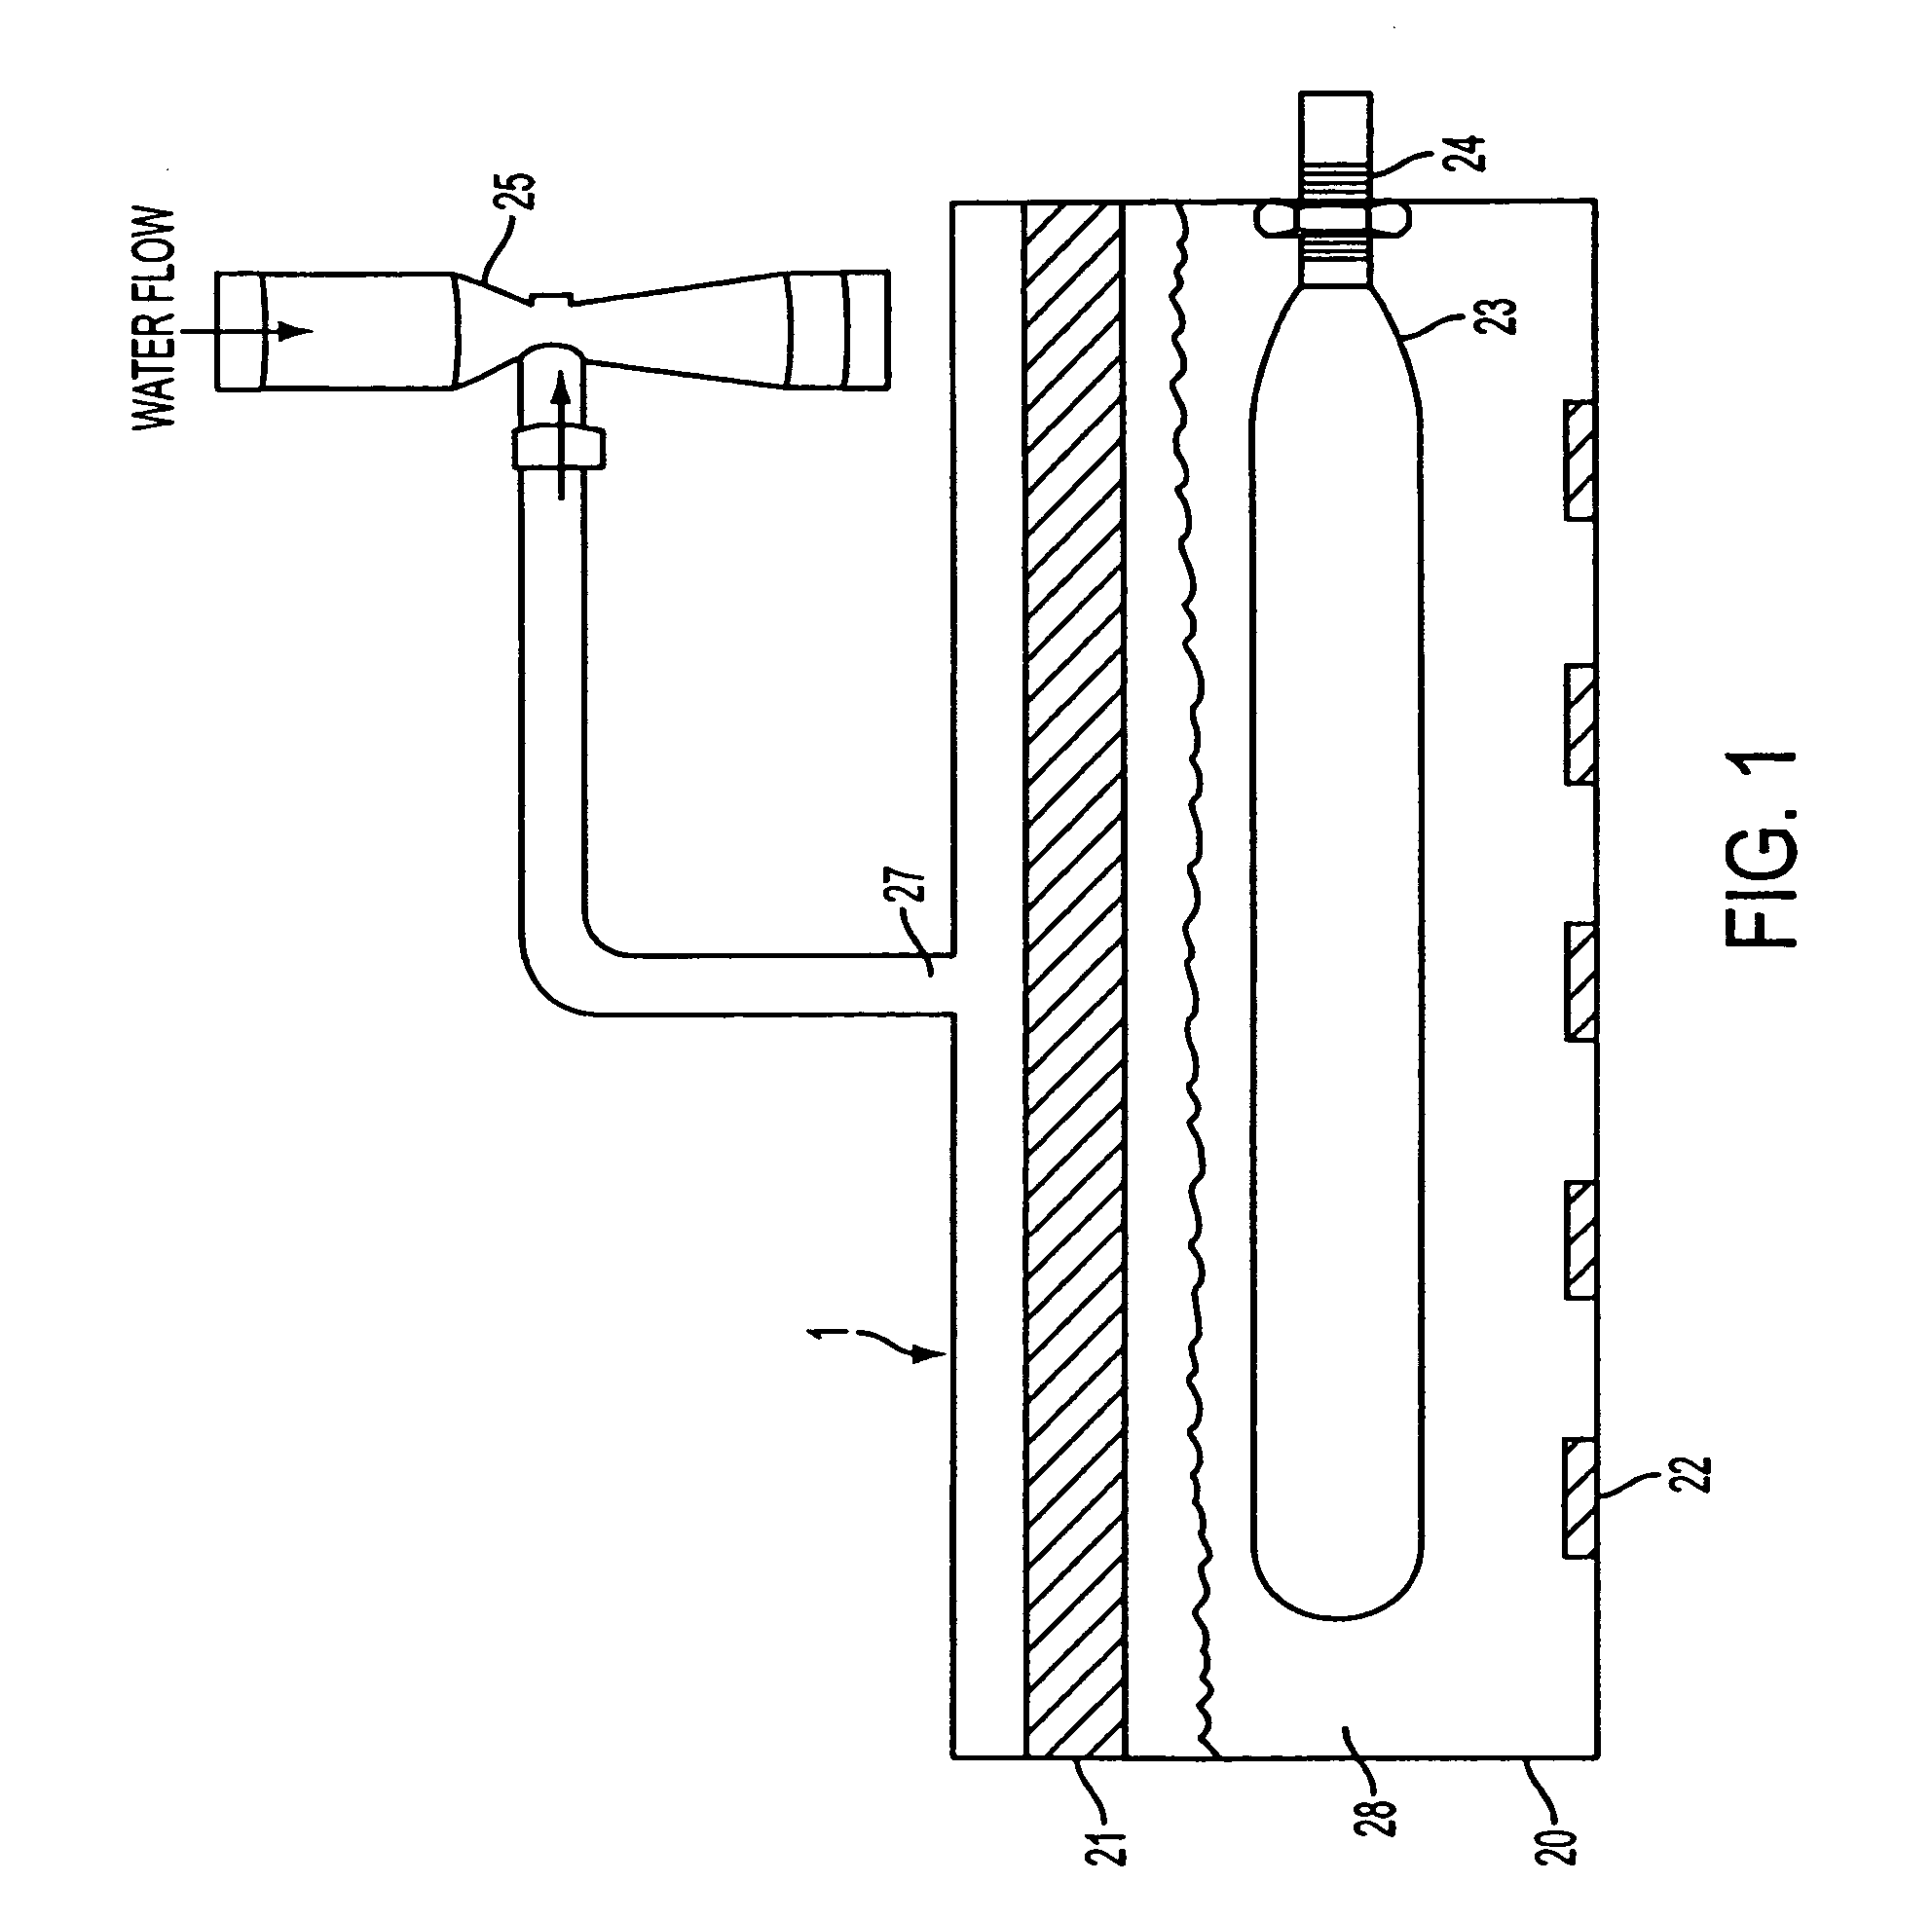 Apparatus and method for producing chlorine dioxide